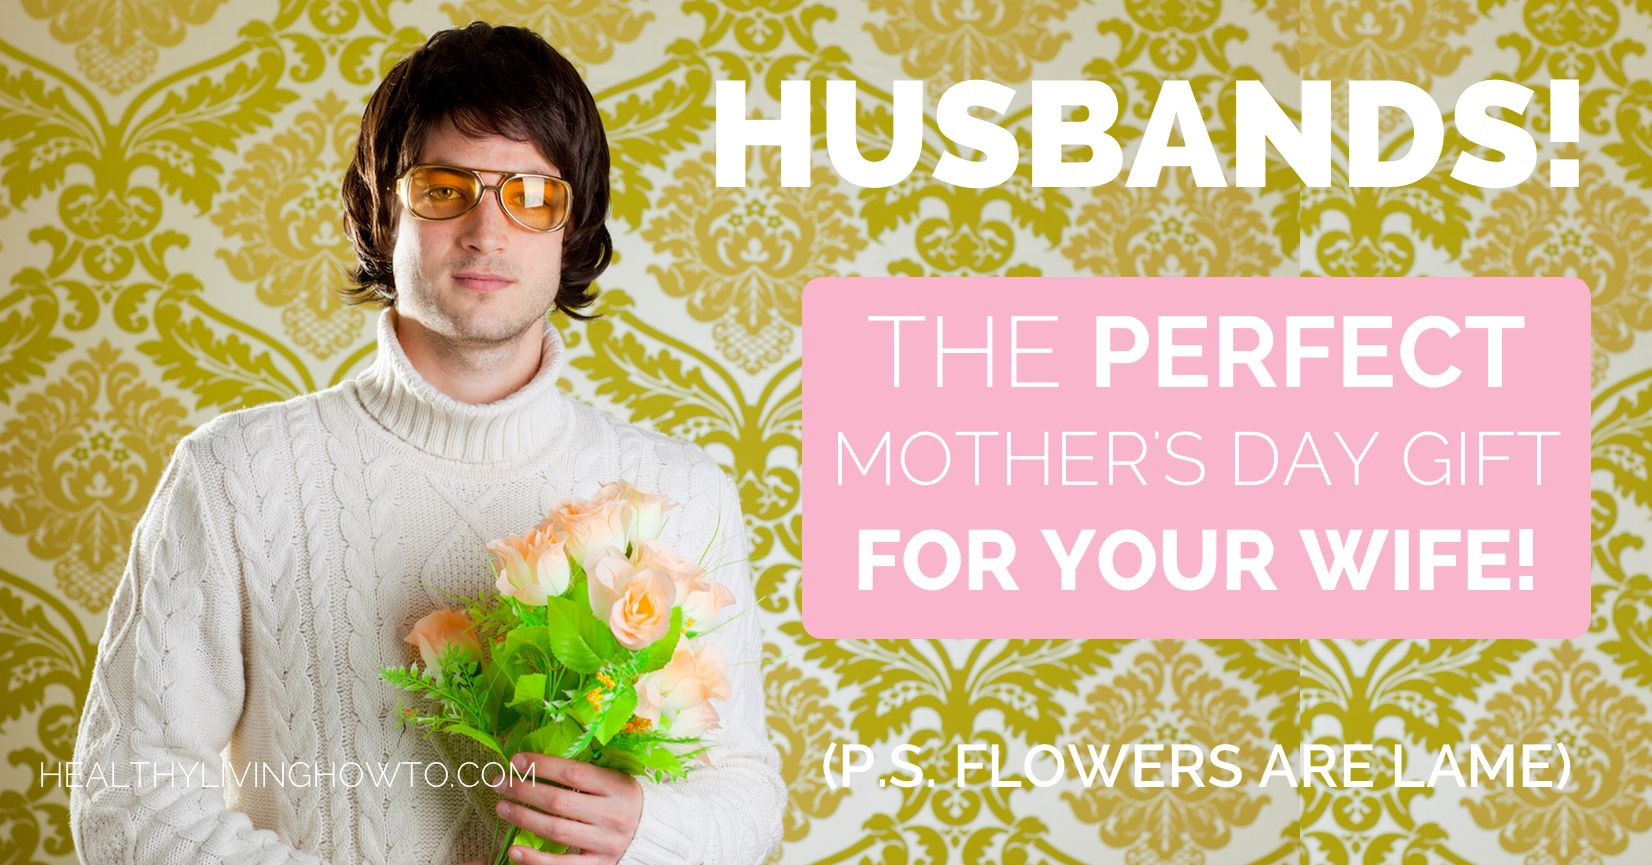 Mothers Day Gift Ideas Wife
 Husbands The Perfect Mother’s Day Gift For Your Wife P